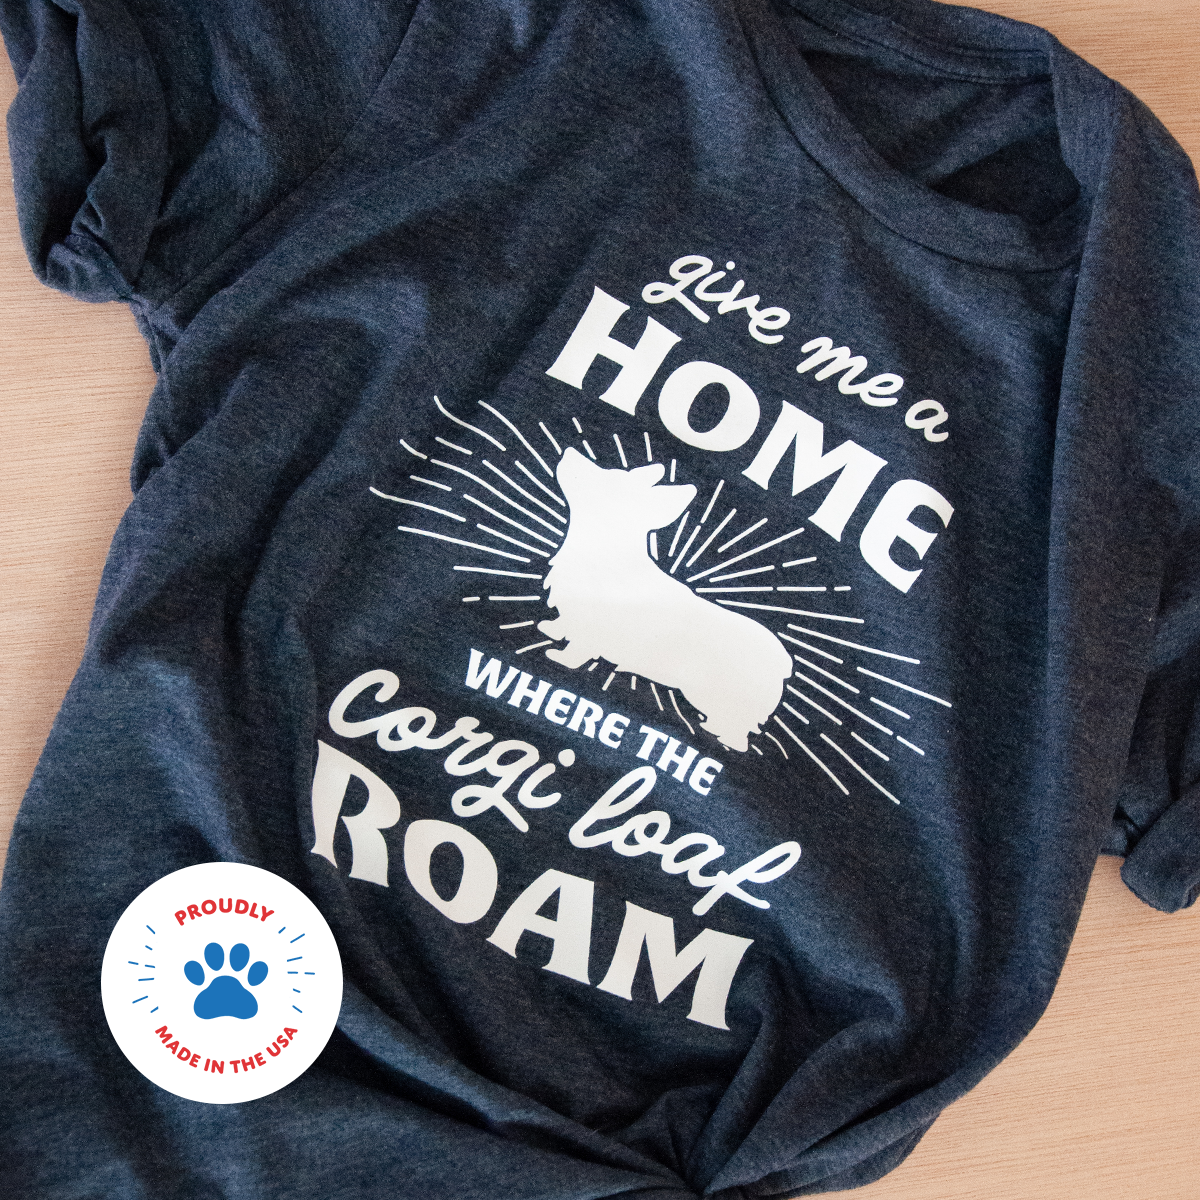 T-shirt lays flat on wood. Shirt is navy blue. Design is white. Design reads Give Me a Home Where the Corgi Loaf Roam.  Made in the USA.